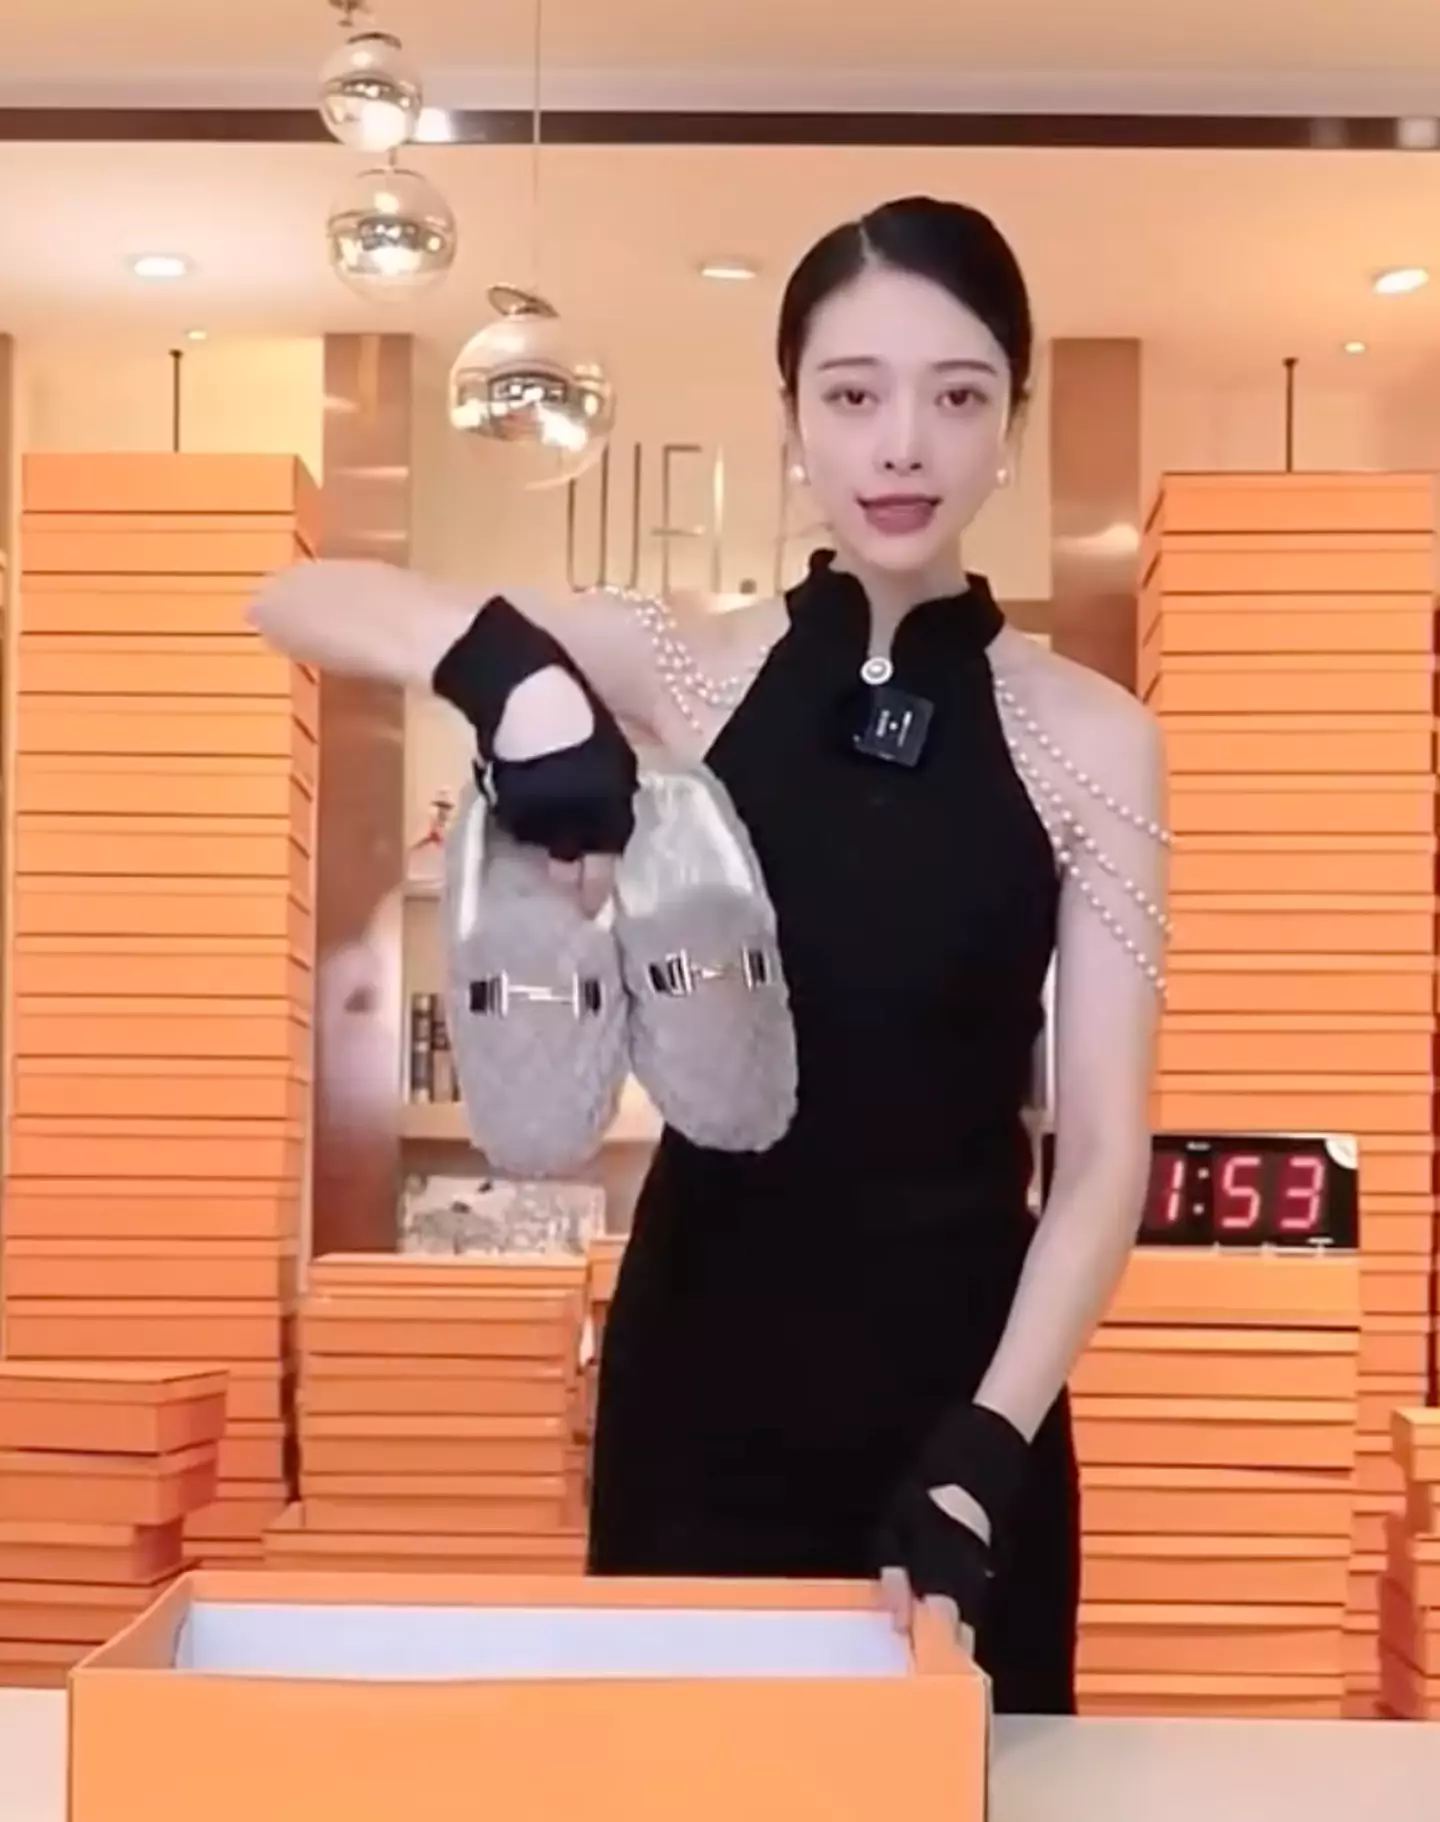 Chinese live streamer Zheng Xiang Xiang shows products for just three seconds in her streams.